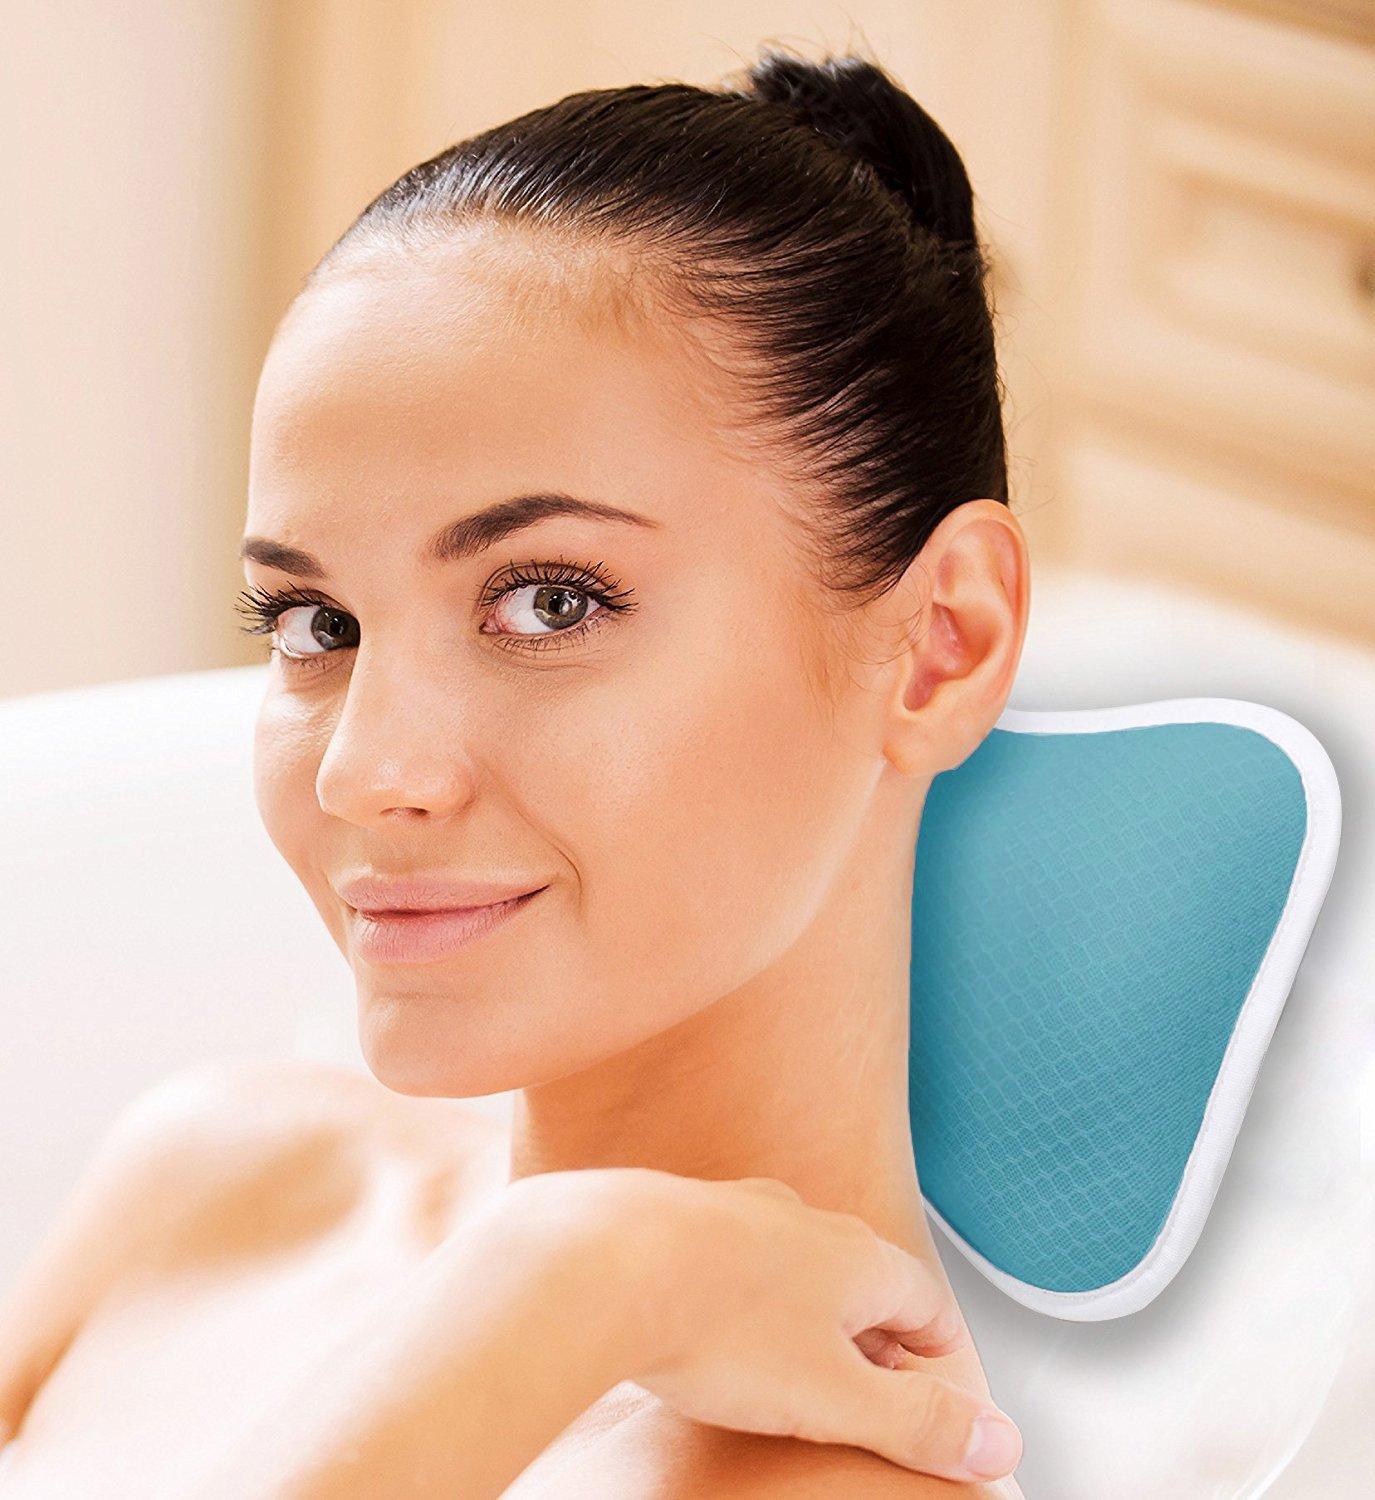 Coastacloud Non-Slip Bathtub Mattress Cushion with Large Suction Cups, Full Body Spa Bath Pillow Mat, Comfort Support Your Head, Neck, Shoulder, Back and Tailbone